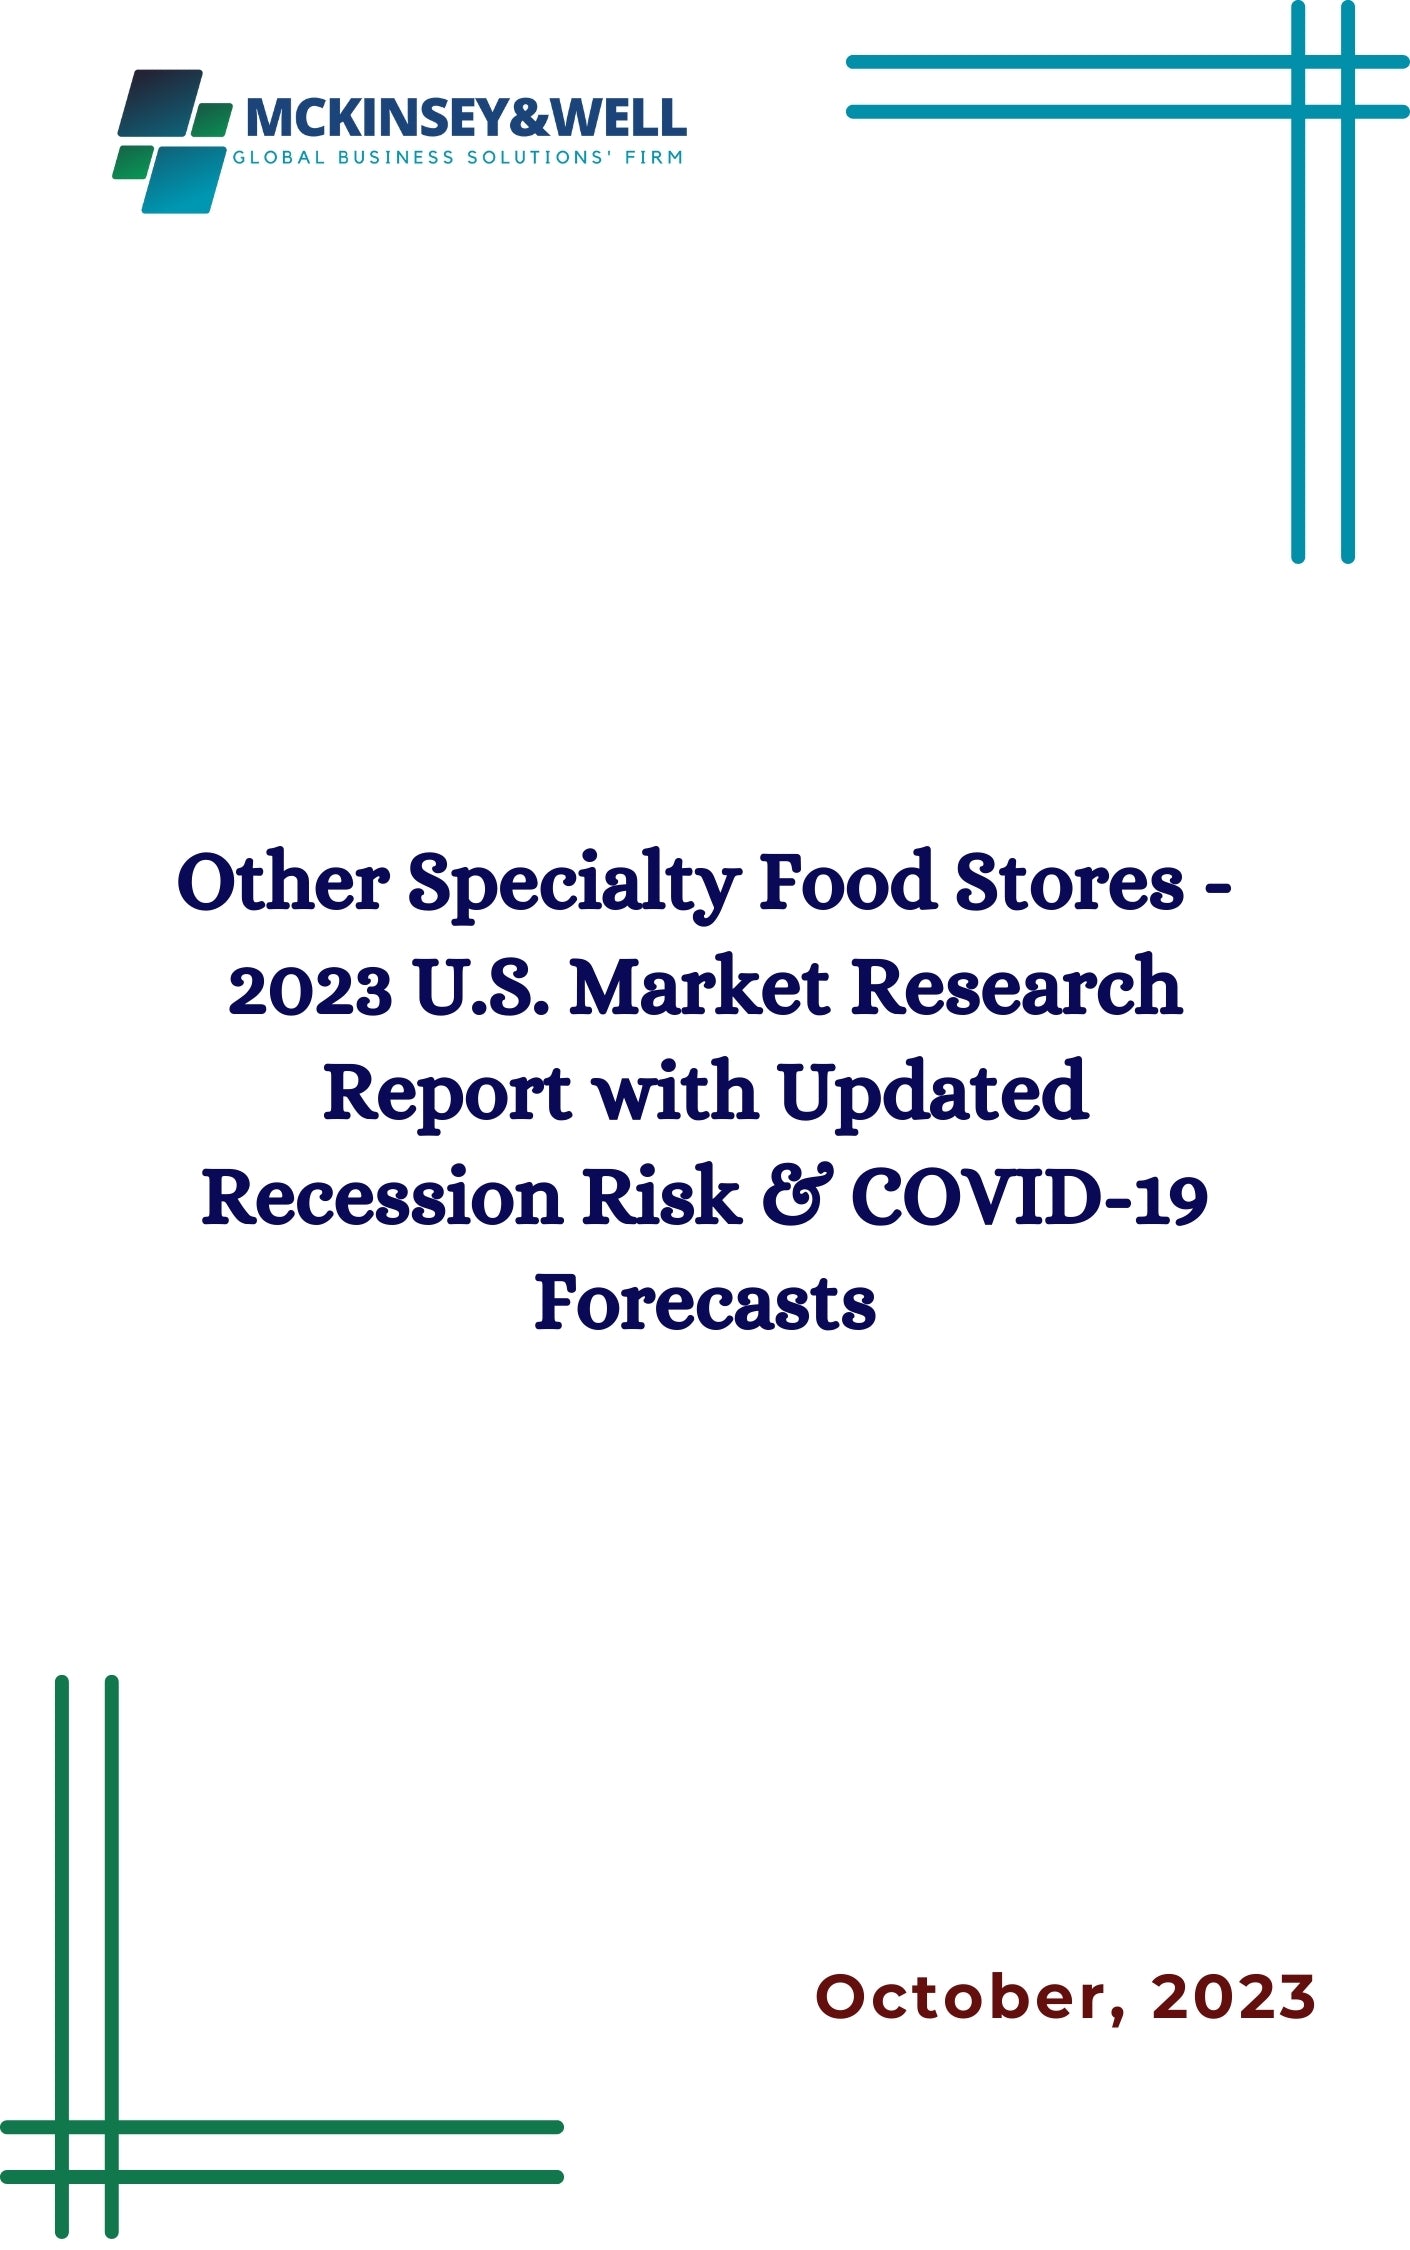 Other Specialty Food Stores - 2023 U.S. Market Research Report with Updated Recession Risk & COVID-19 Forecasts